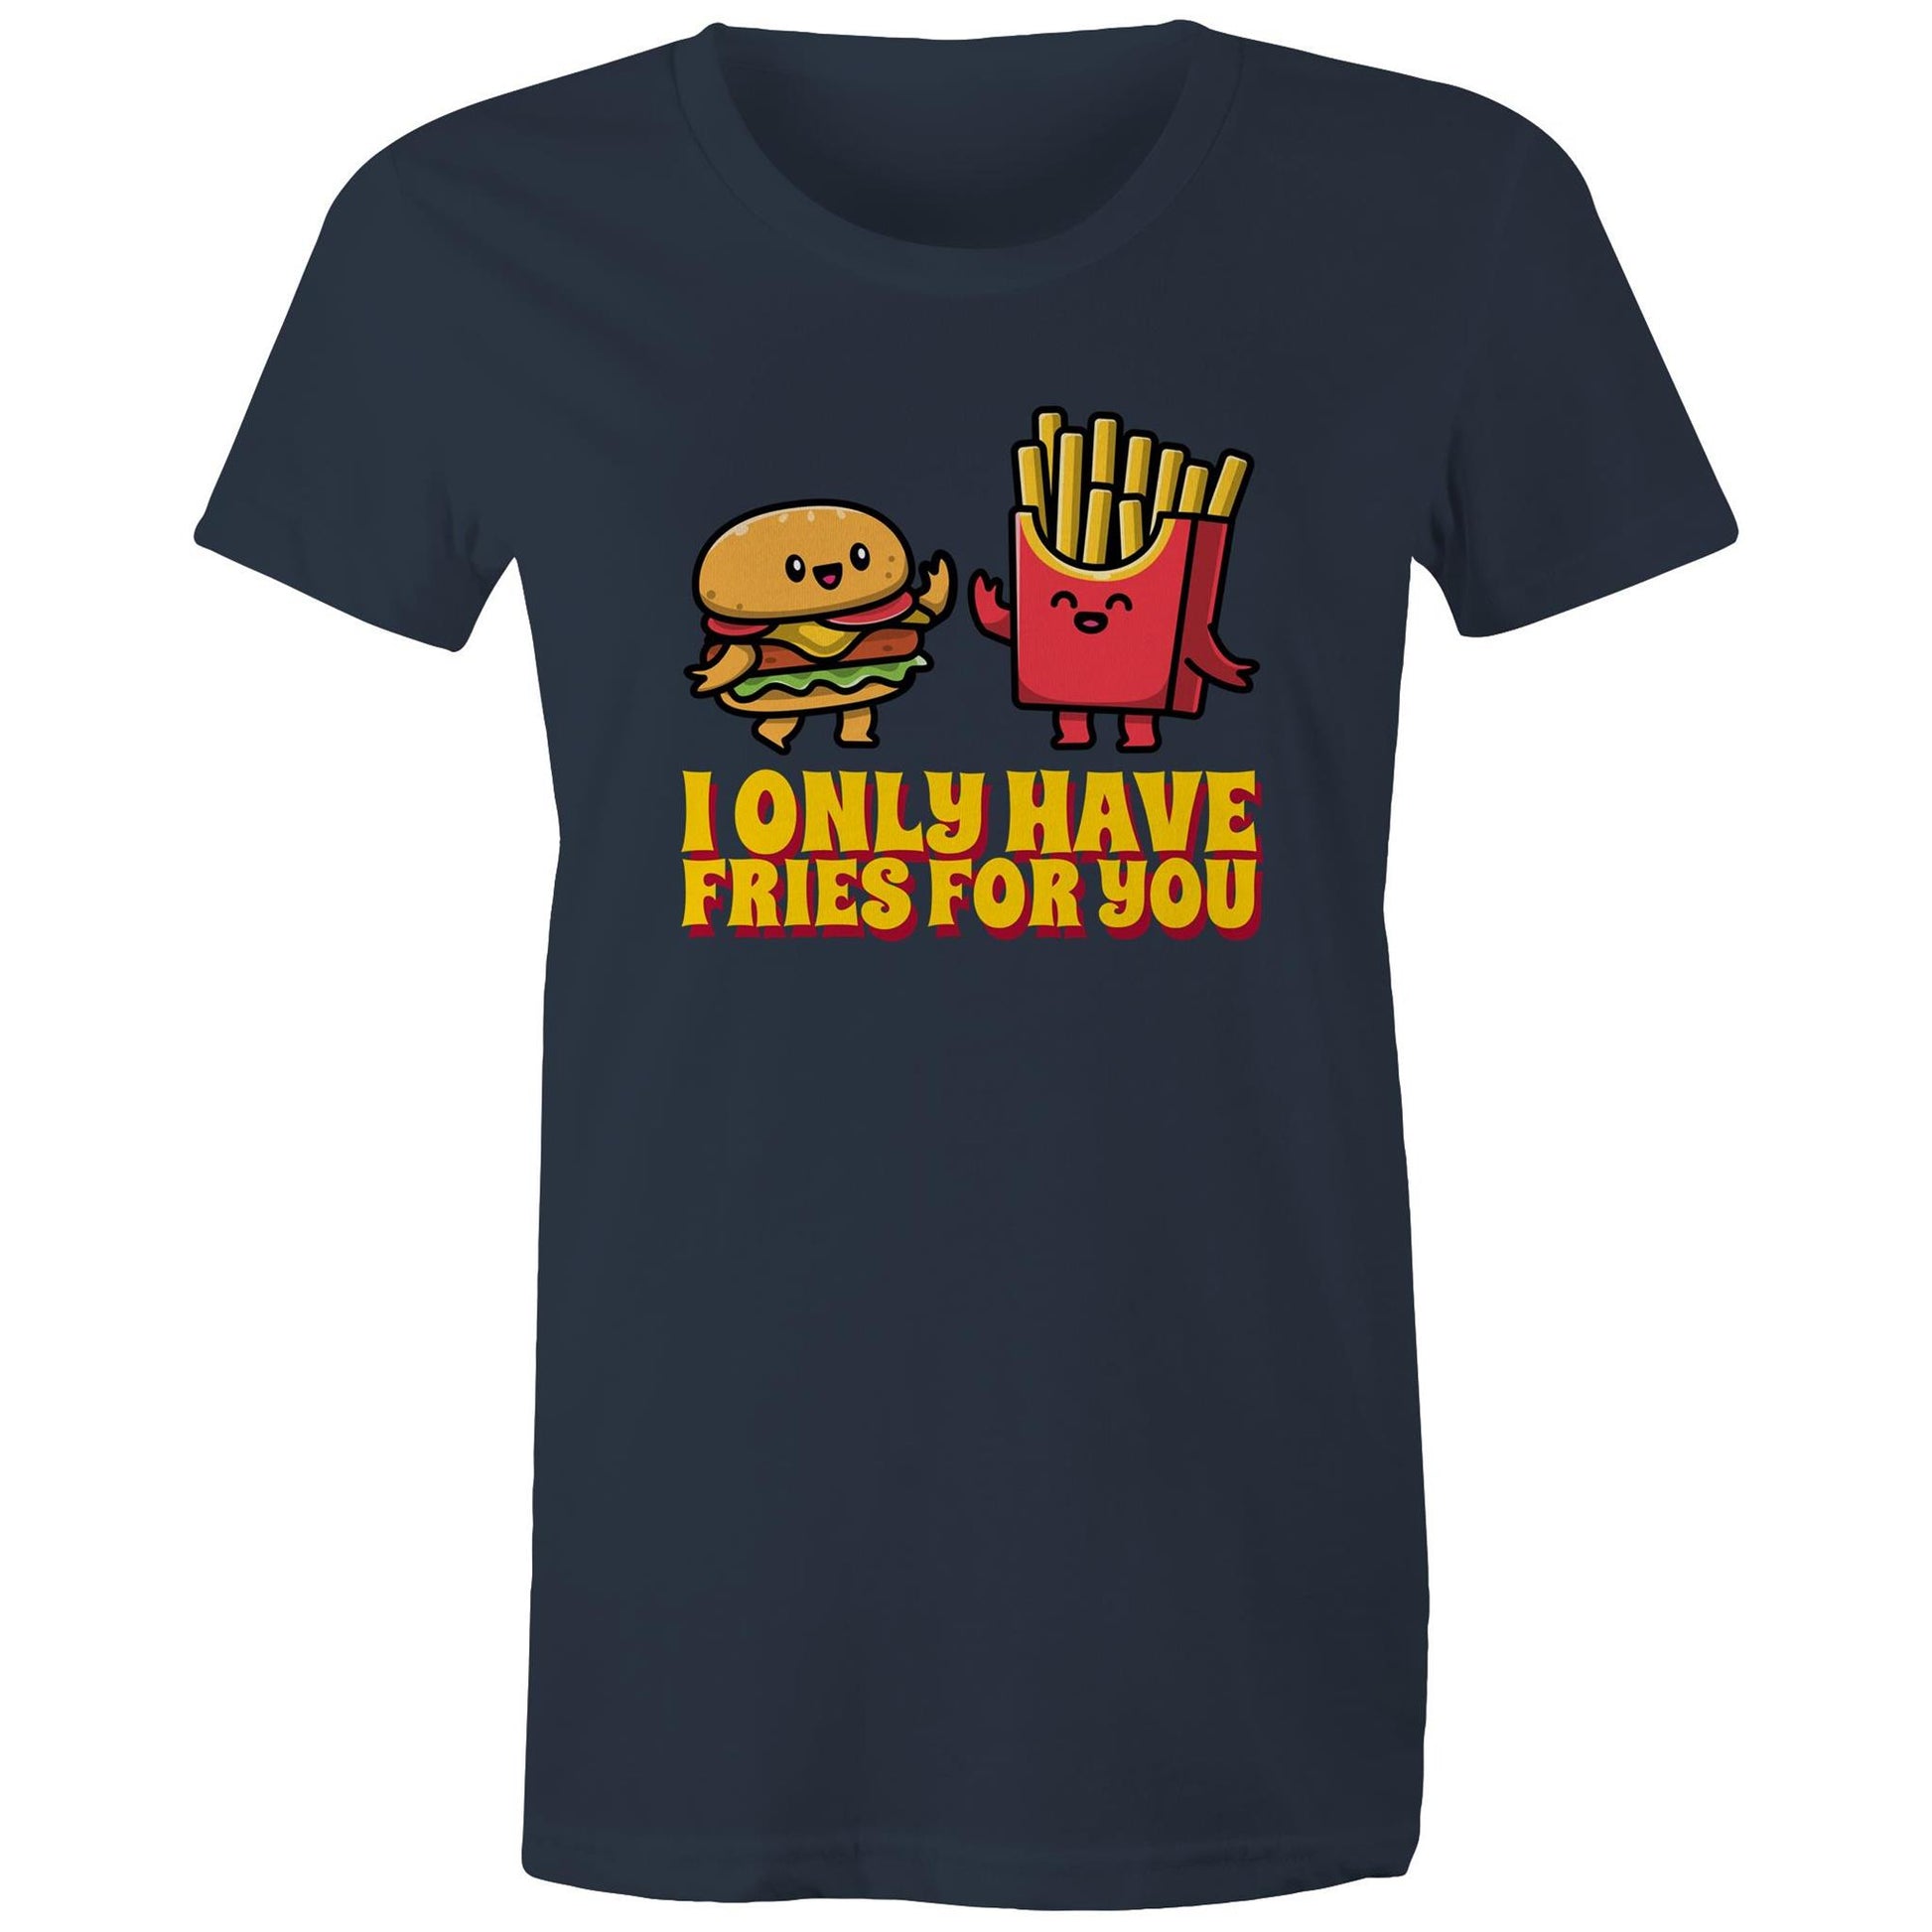 I Only Have Fries For You, Burger And Fries - Womens T-shirt Navy Womens T-shirt